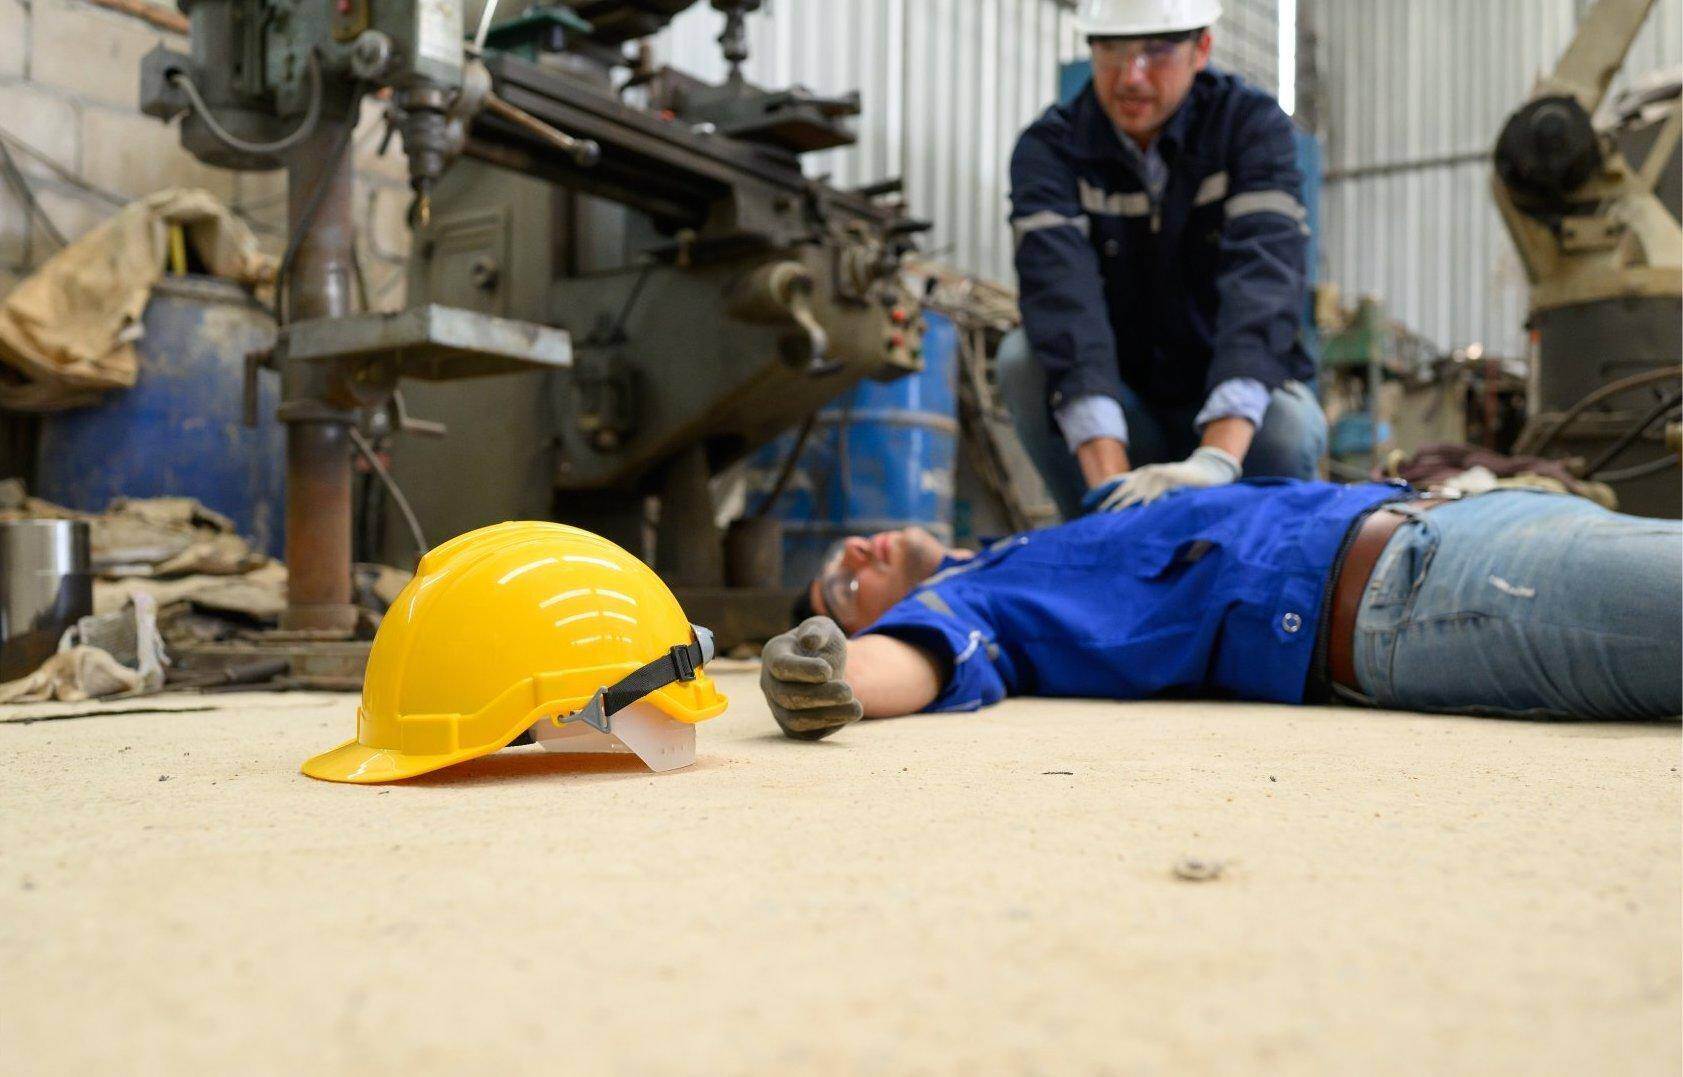 An unconscious man who has been injured on the job who will file for workers compensation in Statesboro, Georgia